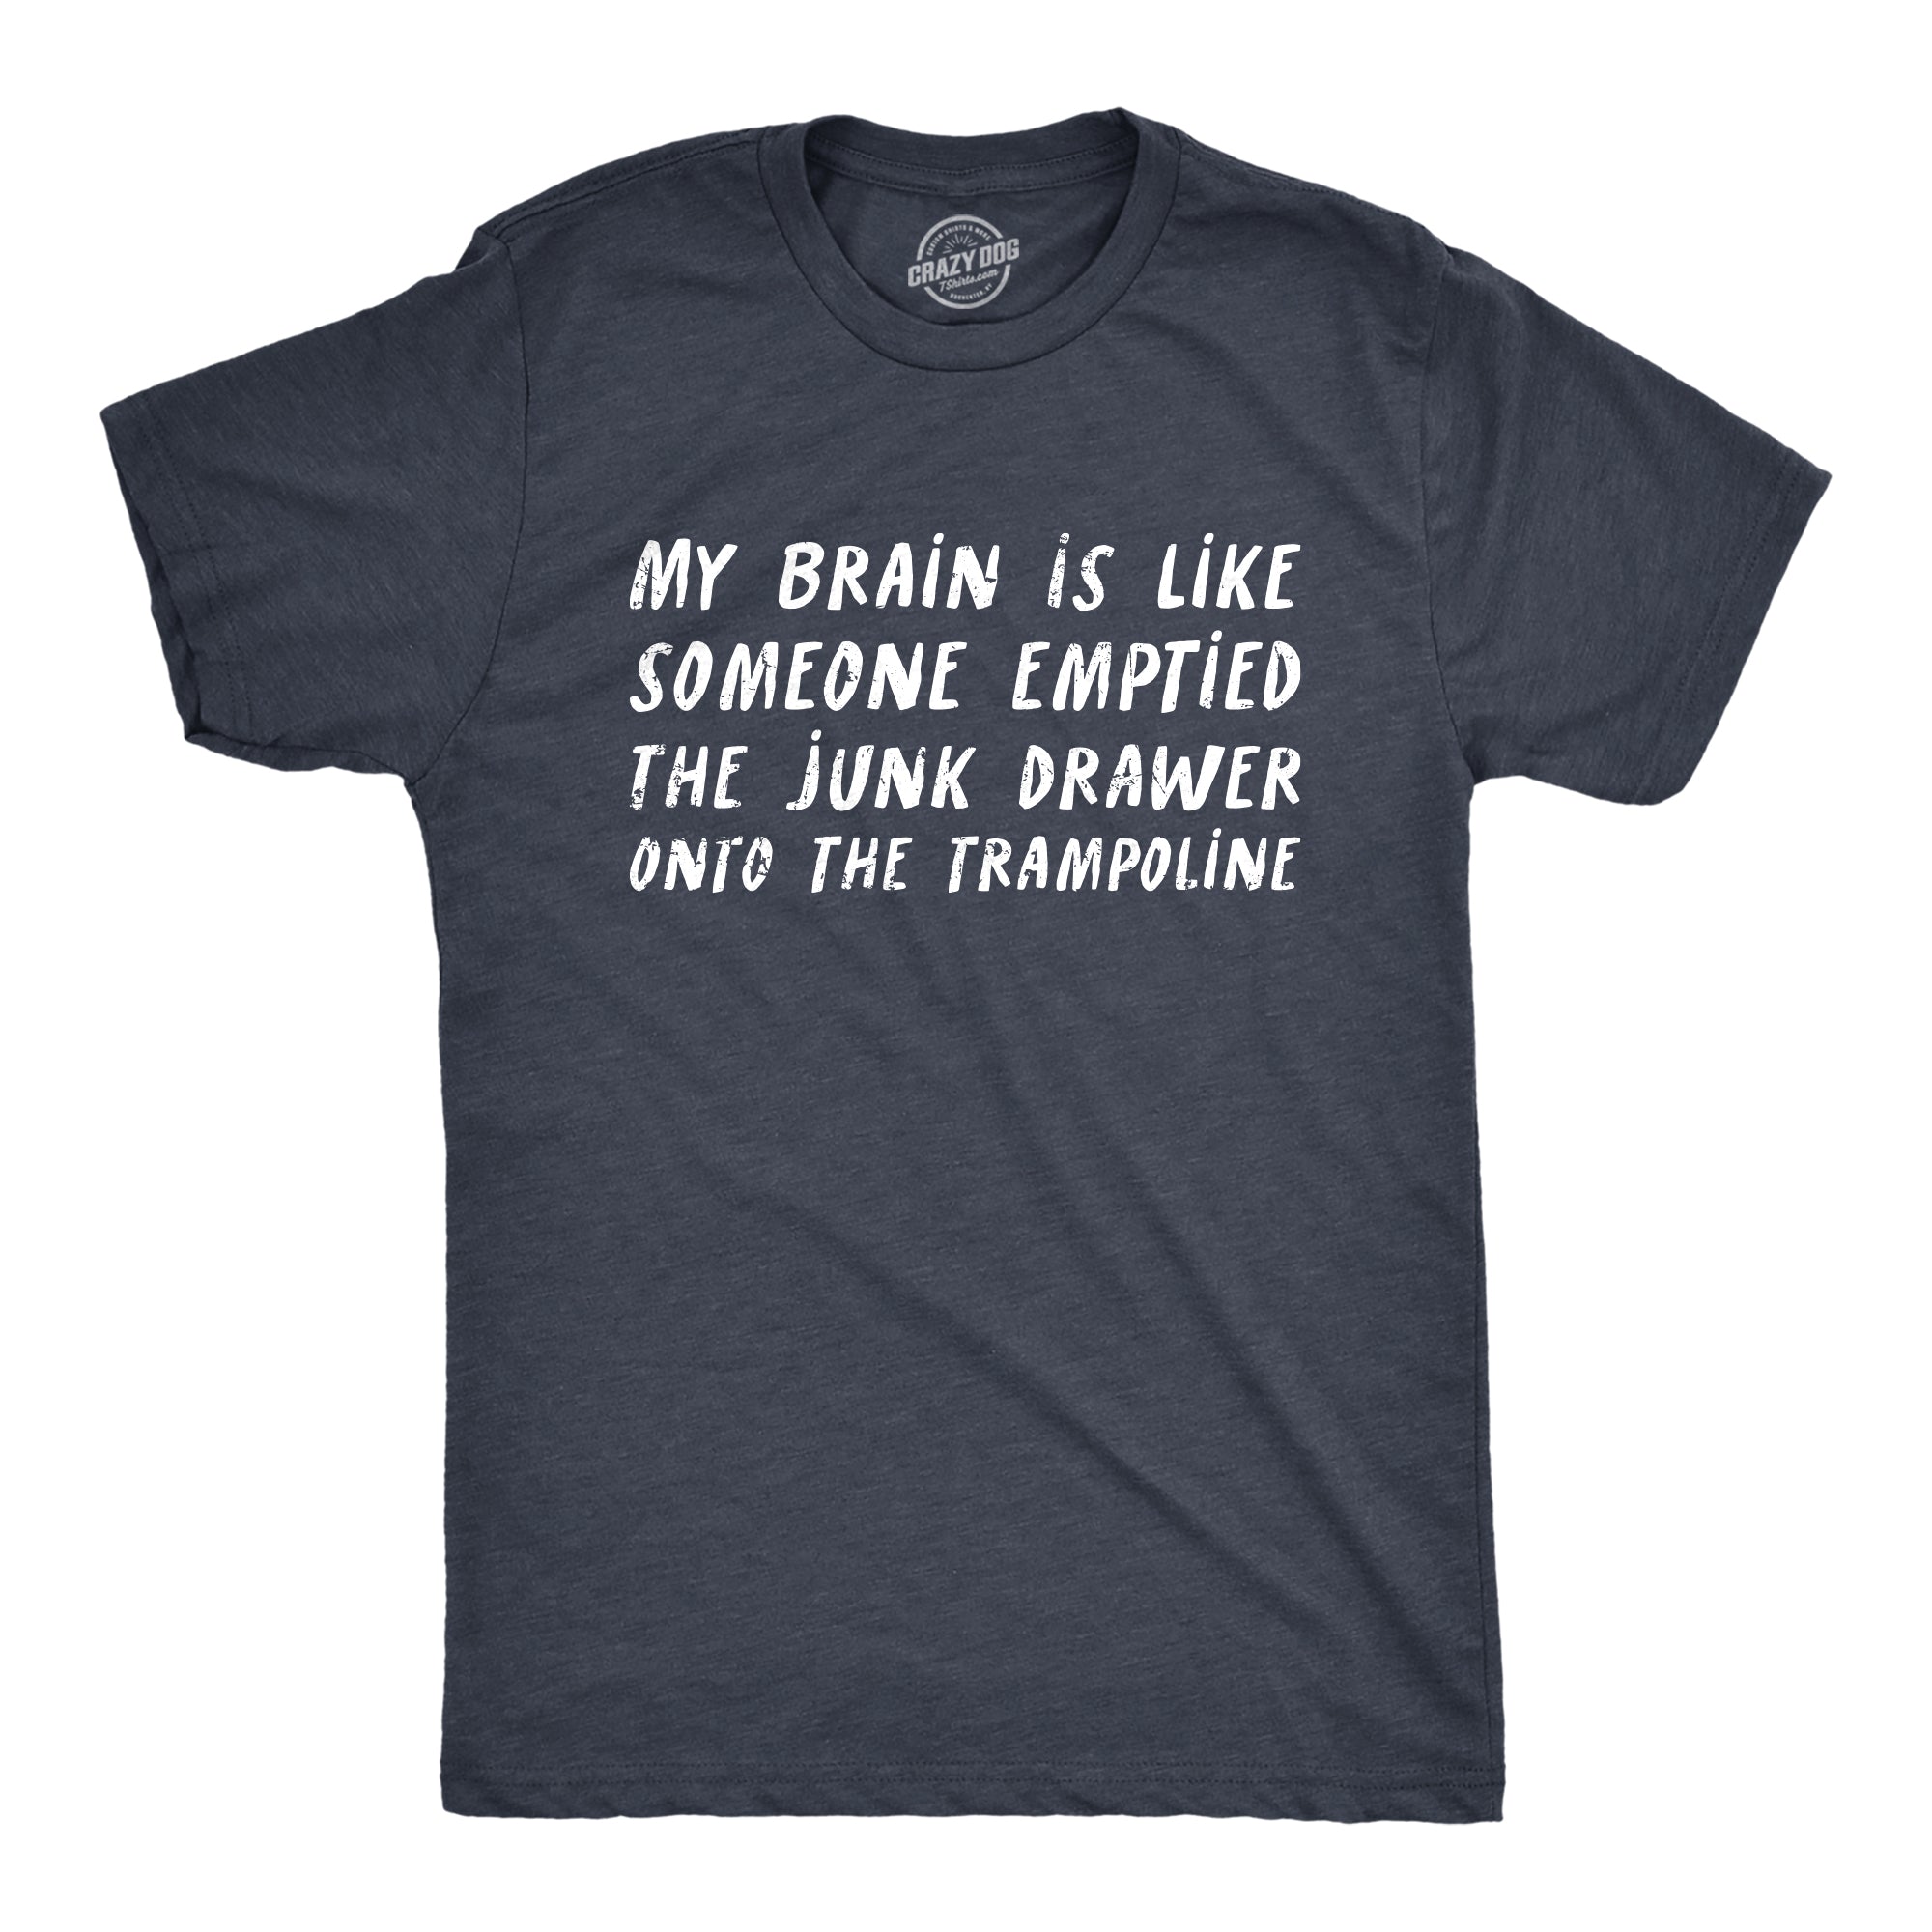 Funny Heather Navy - BRAIN My Brain Is Like Someone Emptied The Junk Drawer Onto The Trampoline Mens T Shirt Nerdy Sarcastic Tee